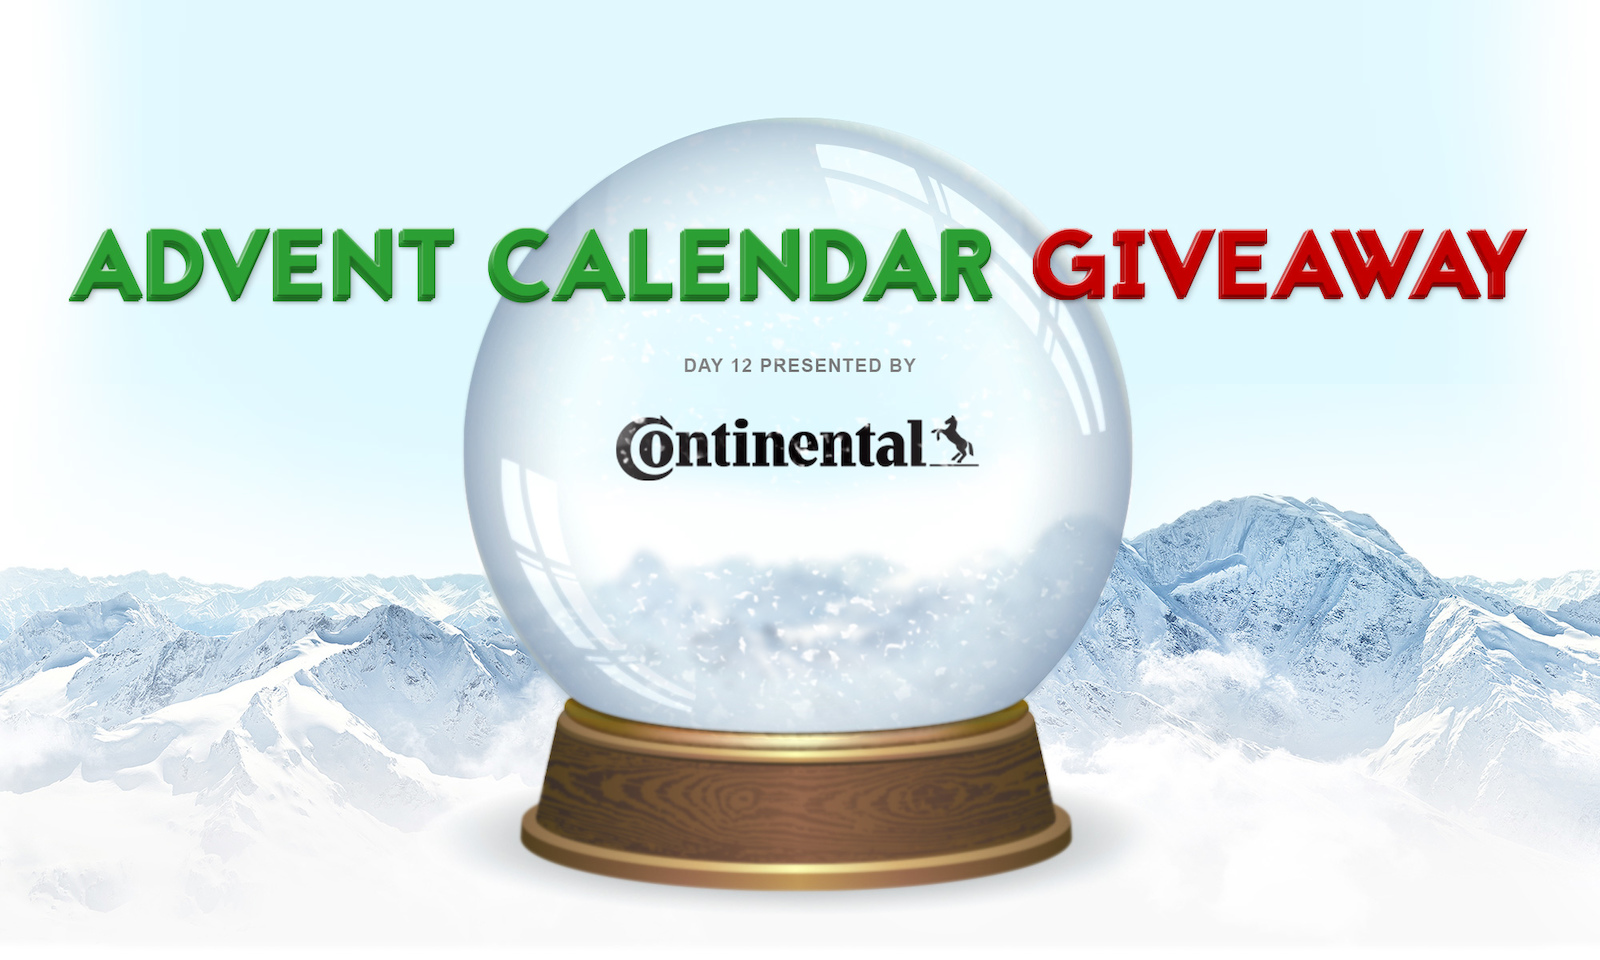 Enter to Win A Continental Prize Pack Pinkbike's Advent Calendar